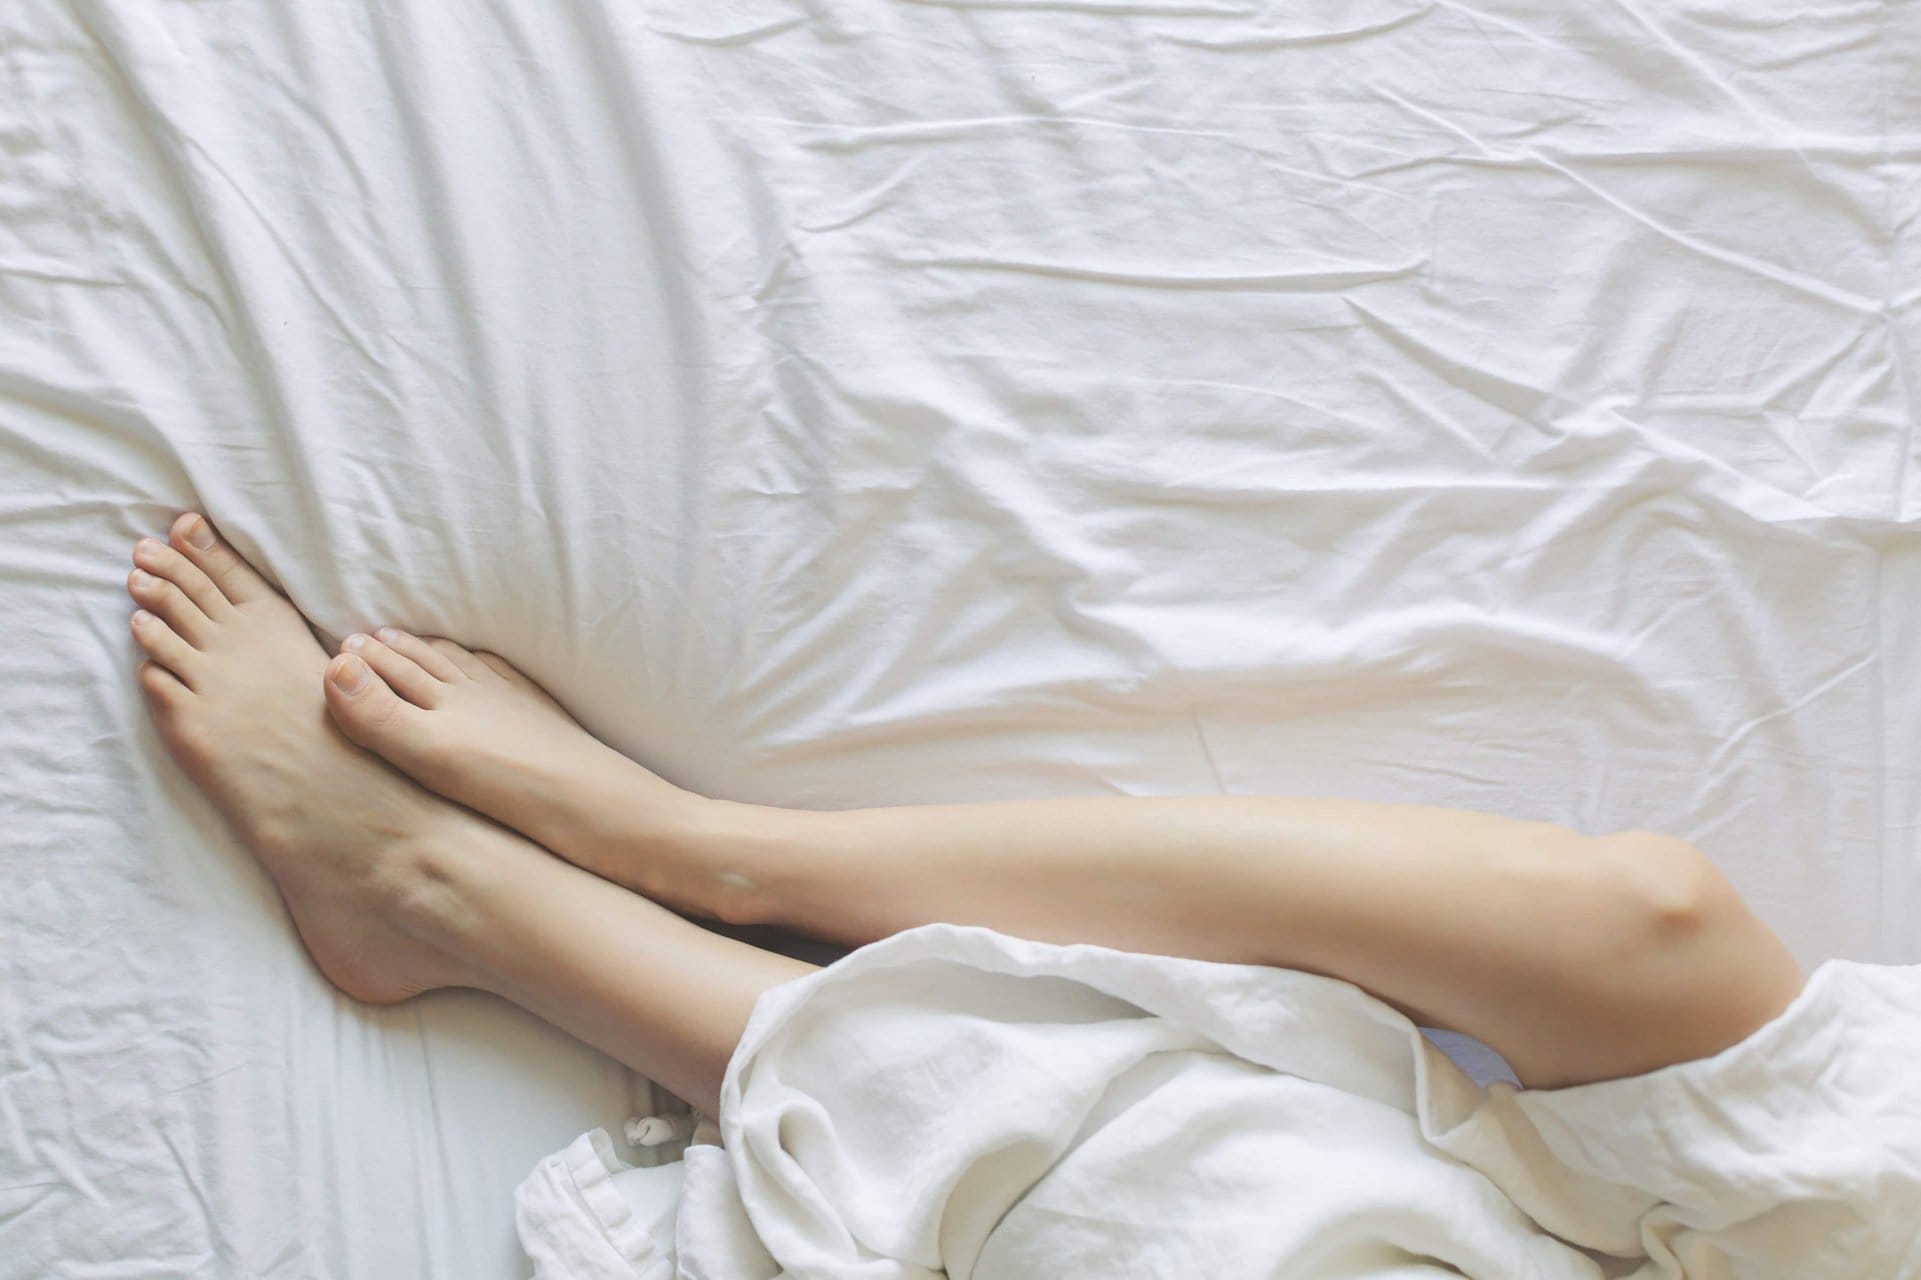 A woman's long-distance love expressed through her feet resting on a white bed.